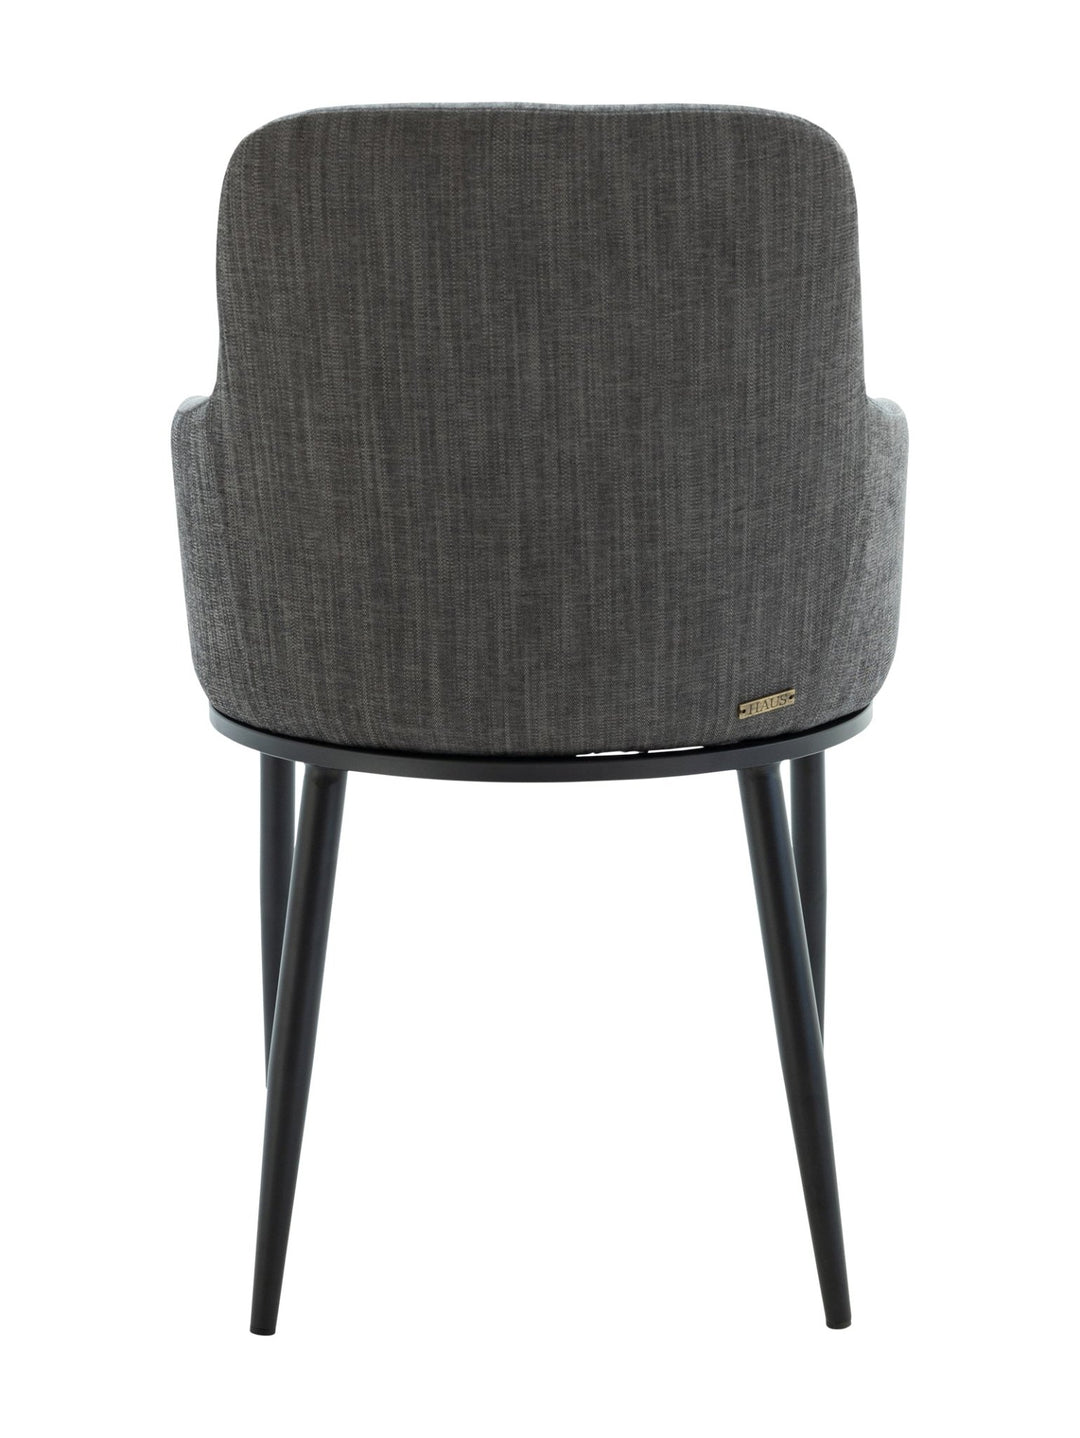 Catherine Dining Chair in Hunter Midnight - Kitchen & Dining Room Chairs - Hertex Haus - badge_fabric